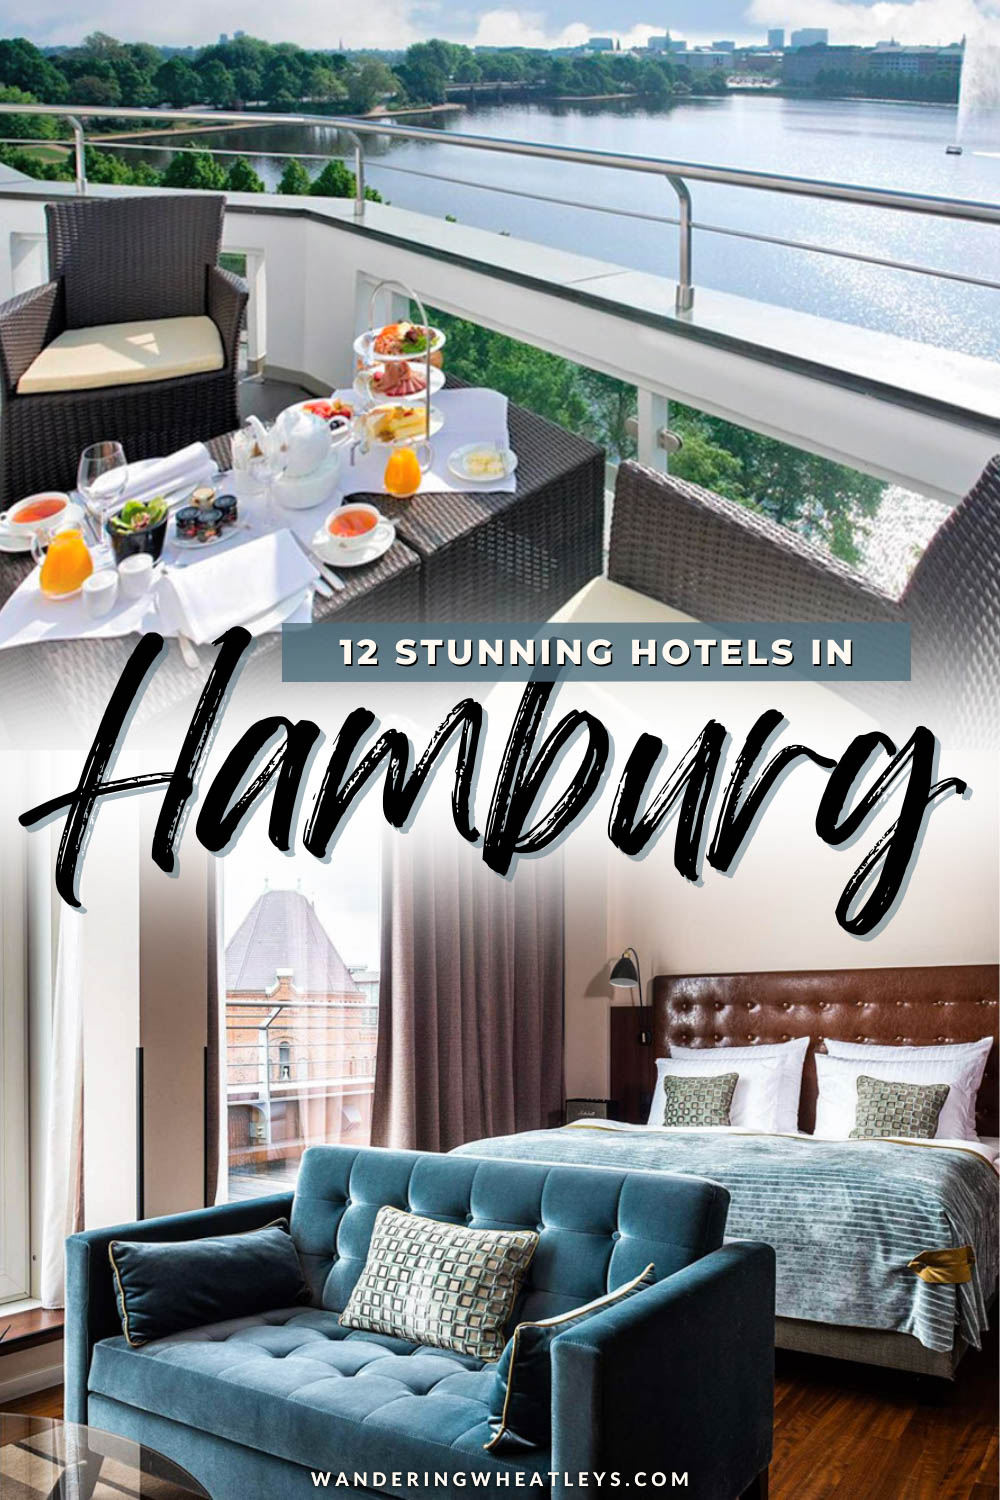 The Best Hotels in Hamburg, Germany